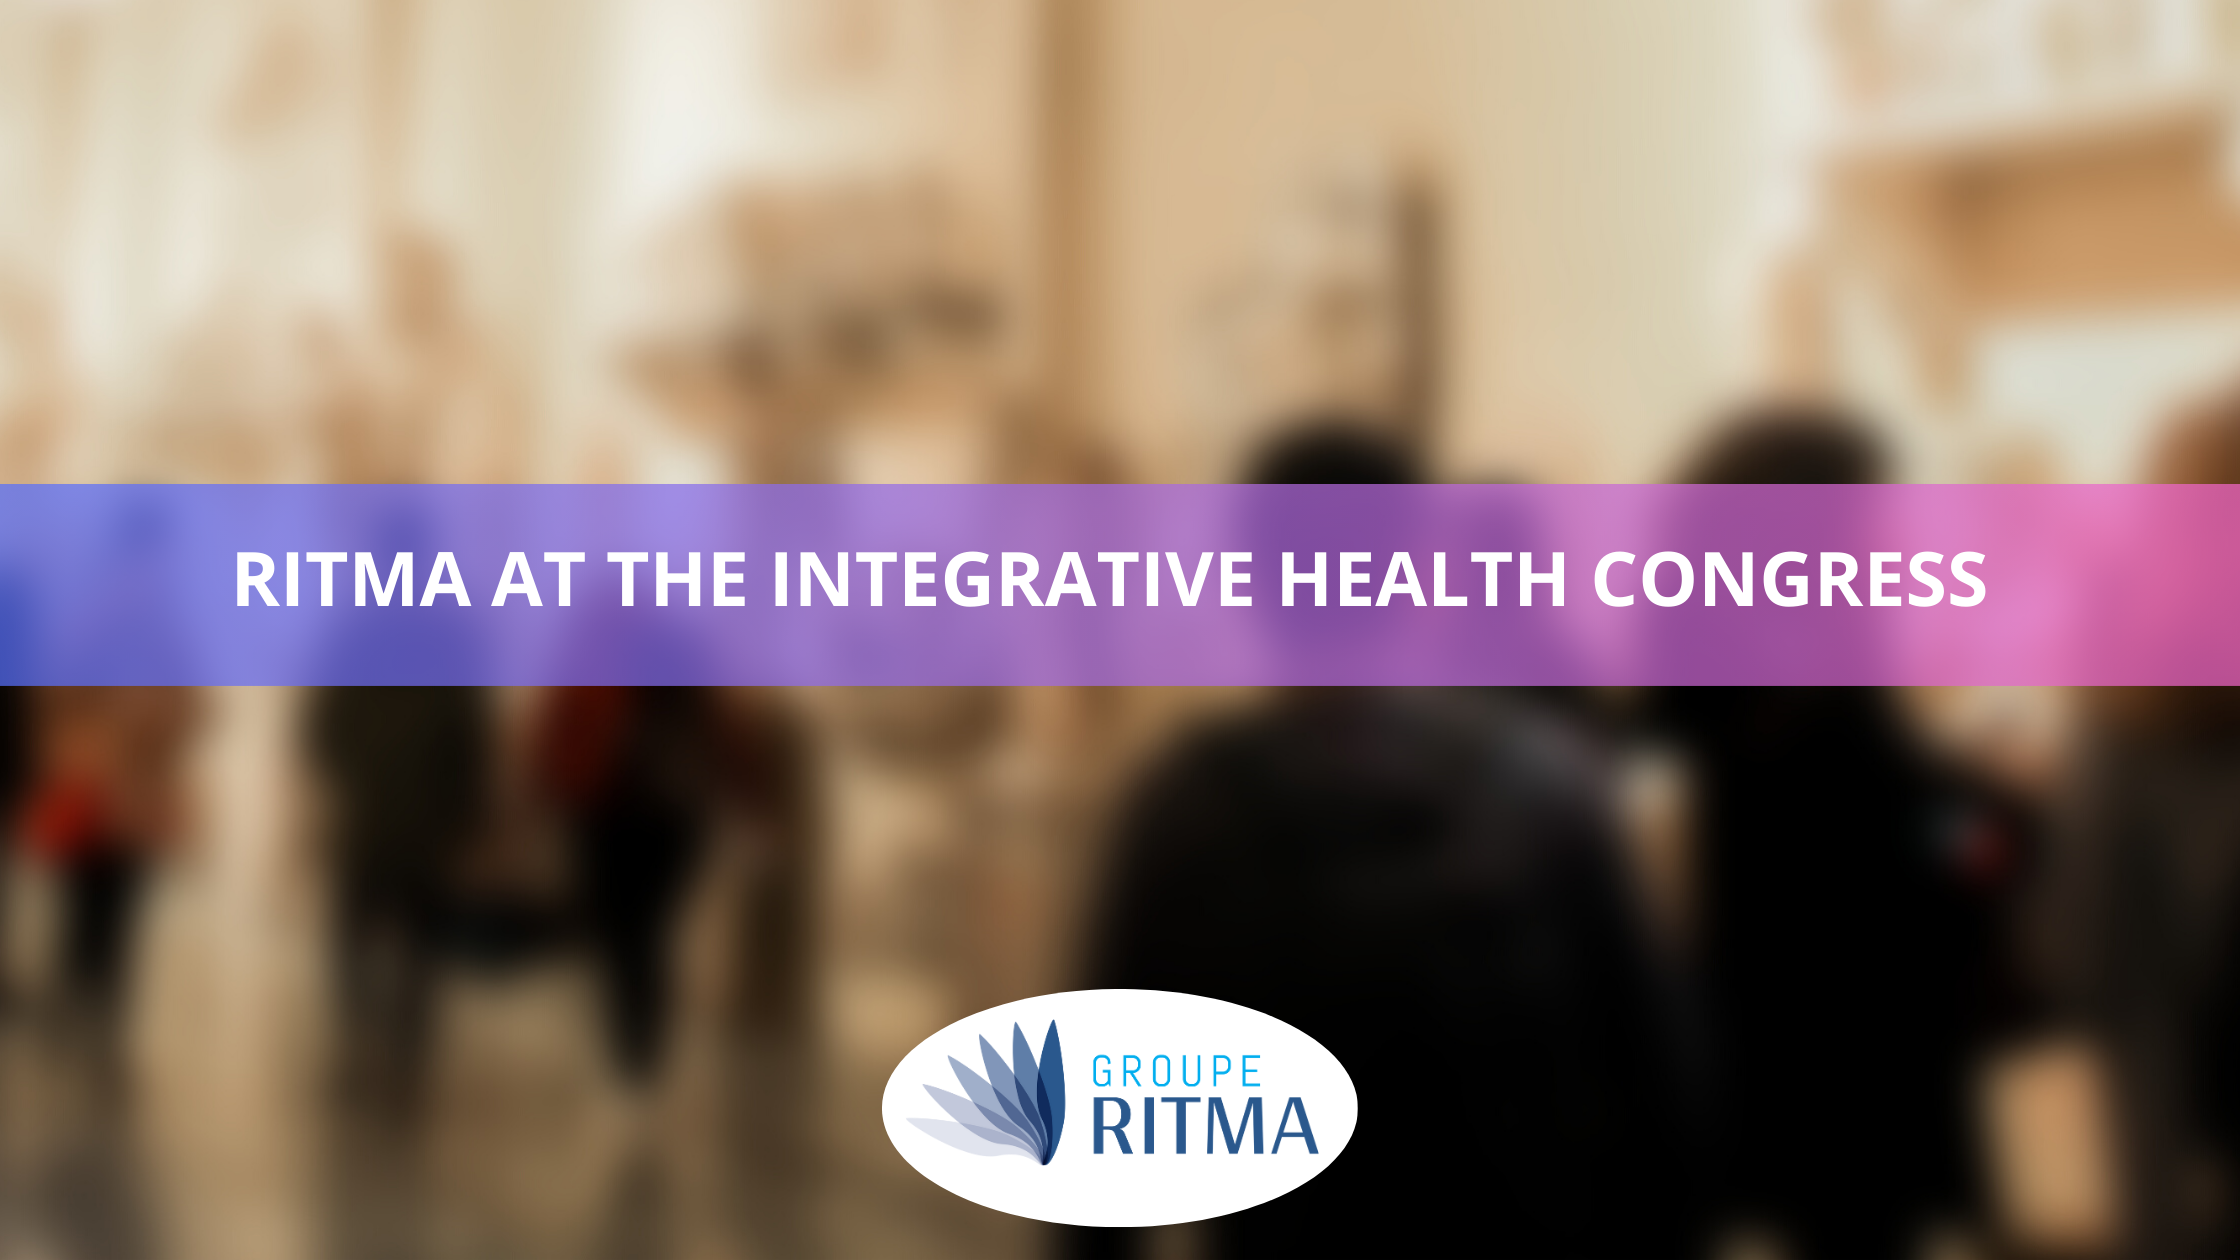 The Ritma Group at the Integrative Health Congress: Commitment to Global Well-being